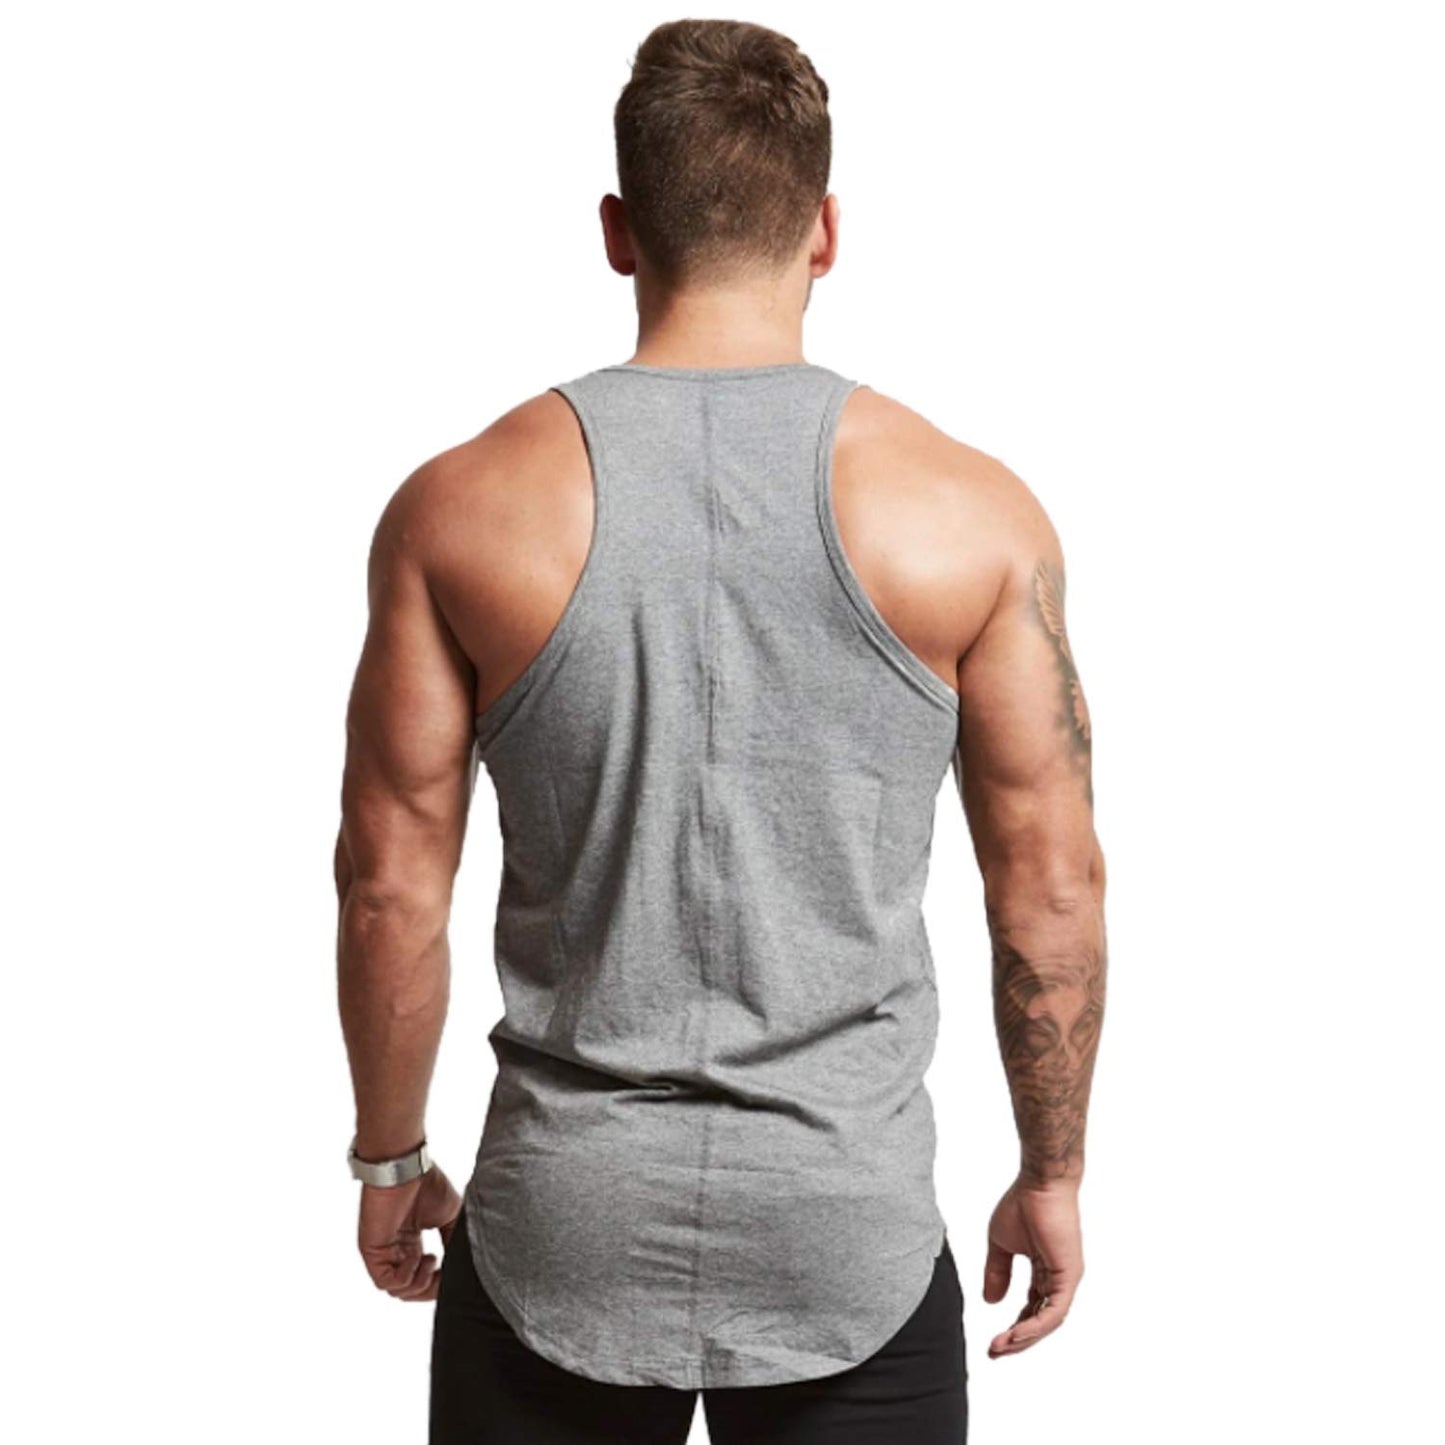 Mens Workout Stringer Tank Tops Fitness Performance Muscle Sleeveless Shirts Gym Training Bodybuilding Vest